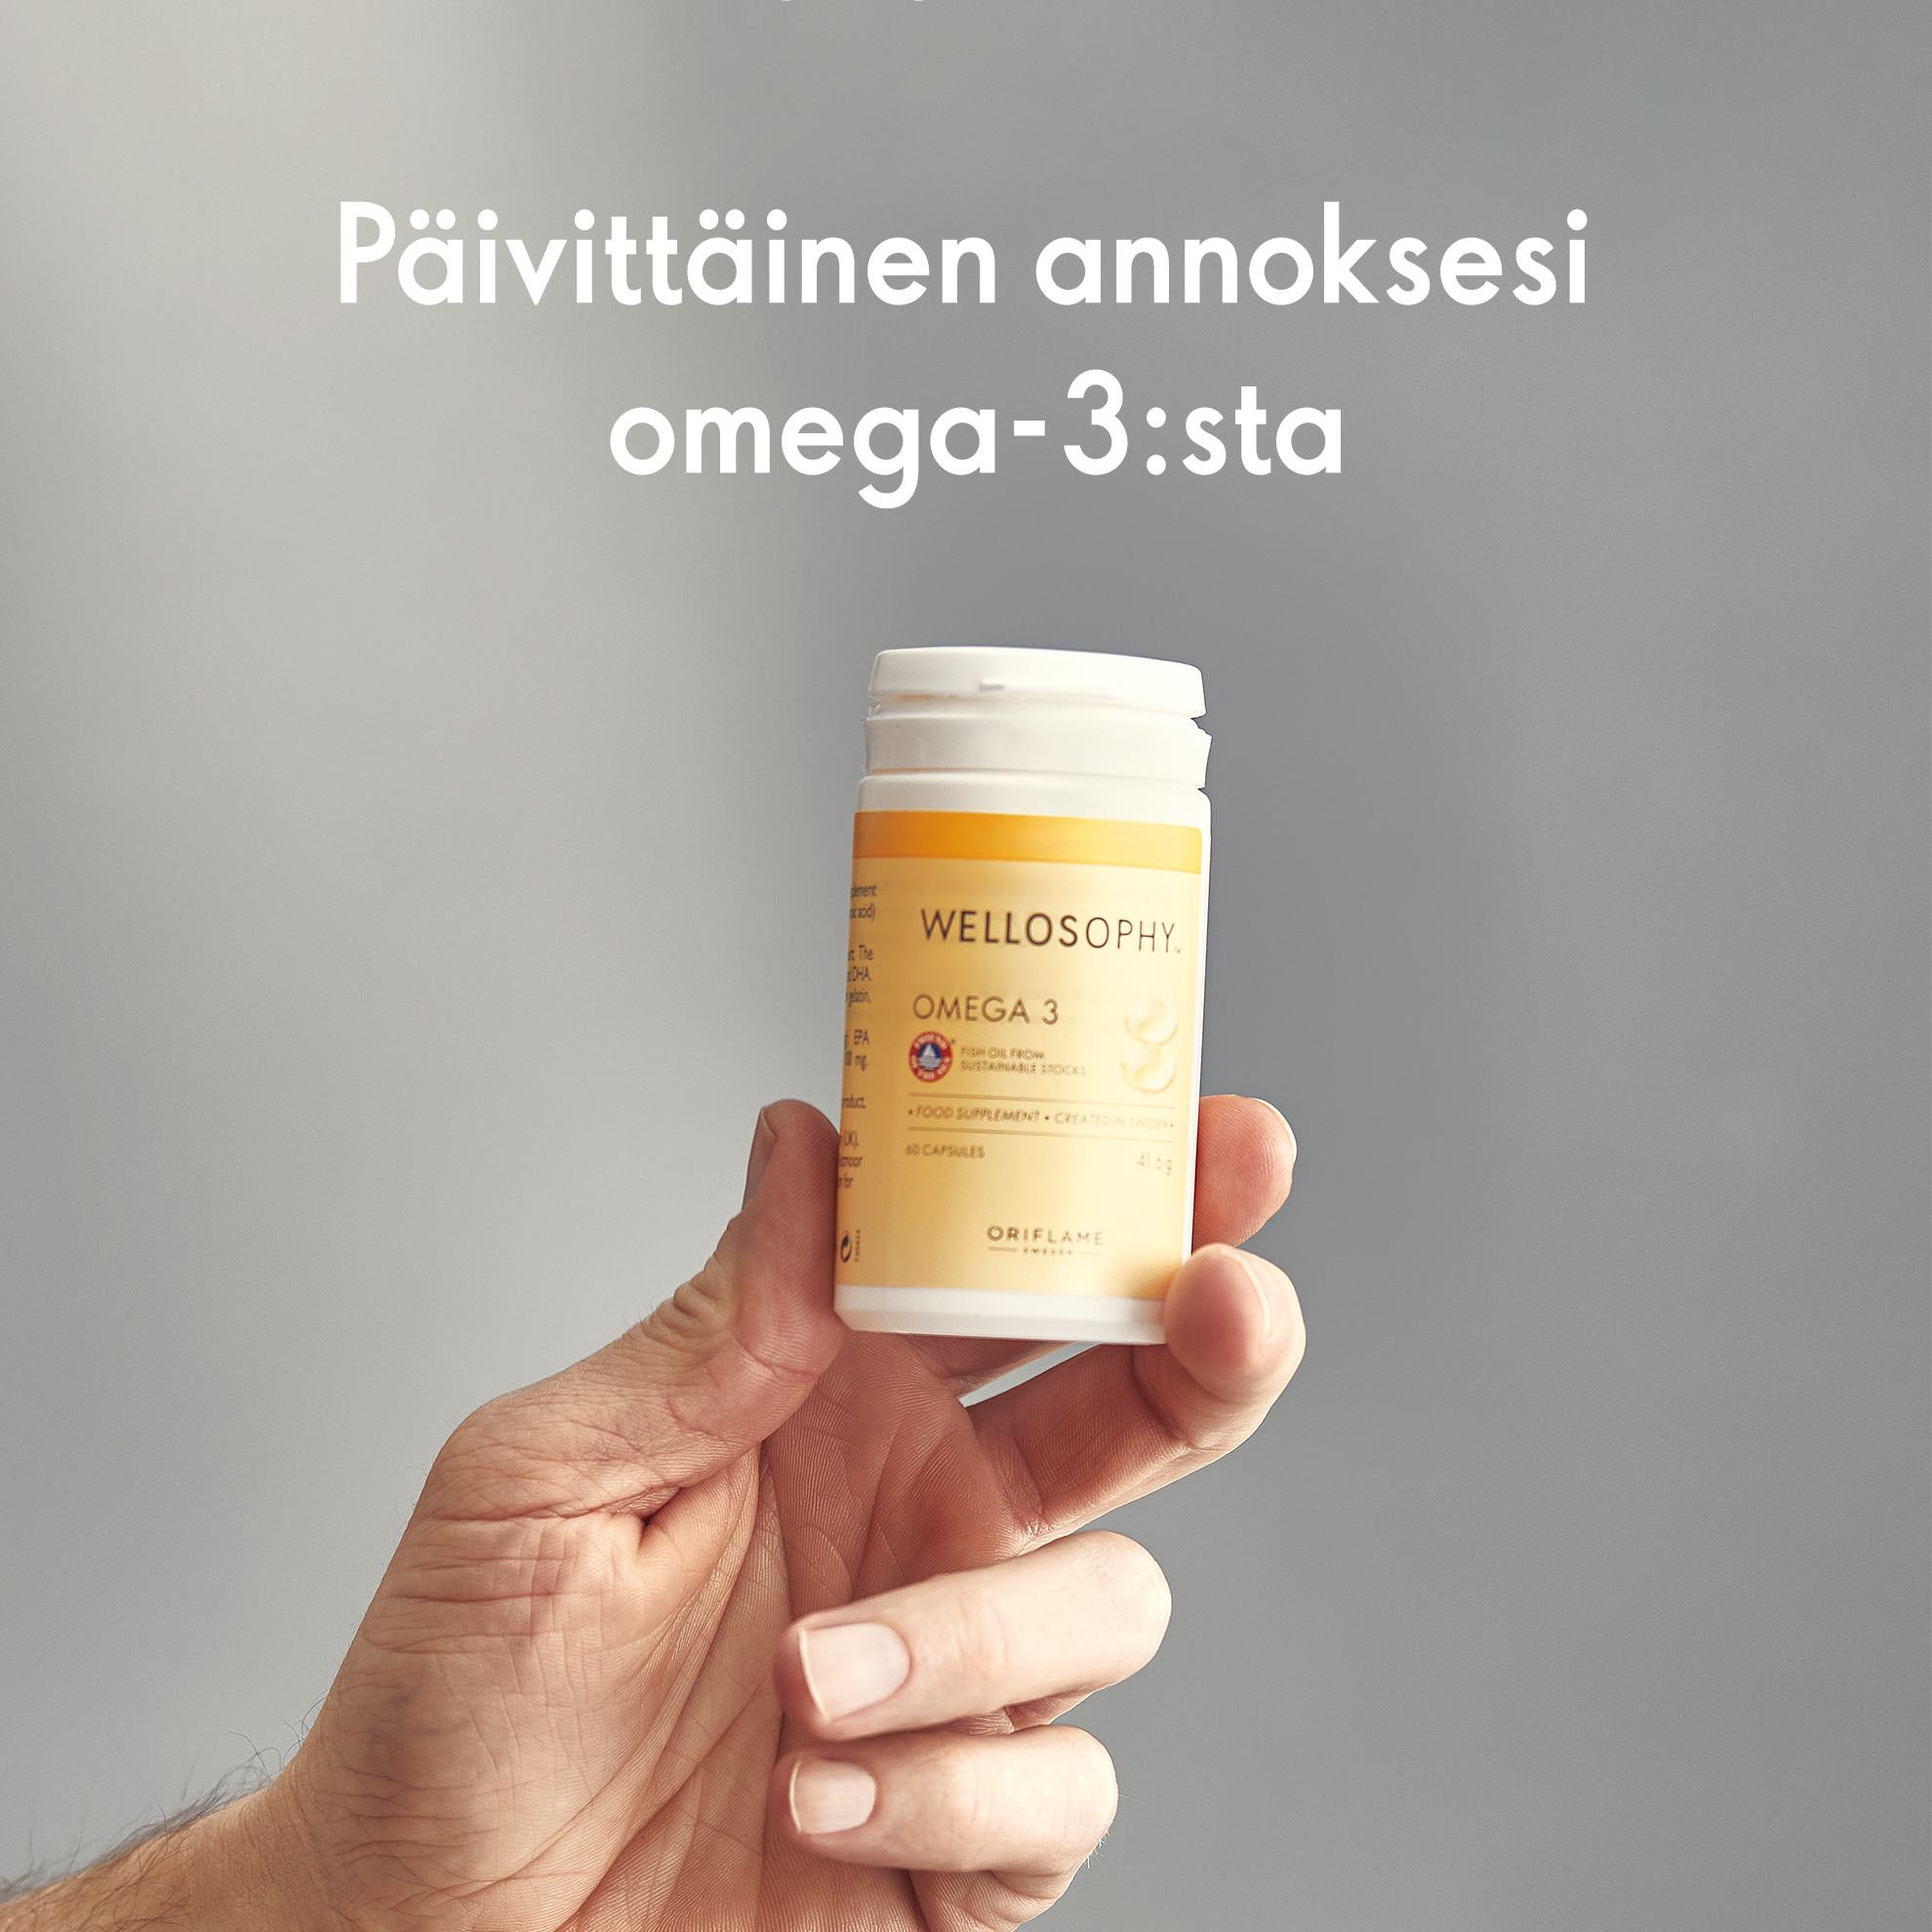 https://media-cdn.oriflame.com/productImage?externalMediaId=product-management-media%2fProducts%2f38556%2fFI%2f38556_3.png&id=18289081&version=1